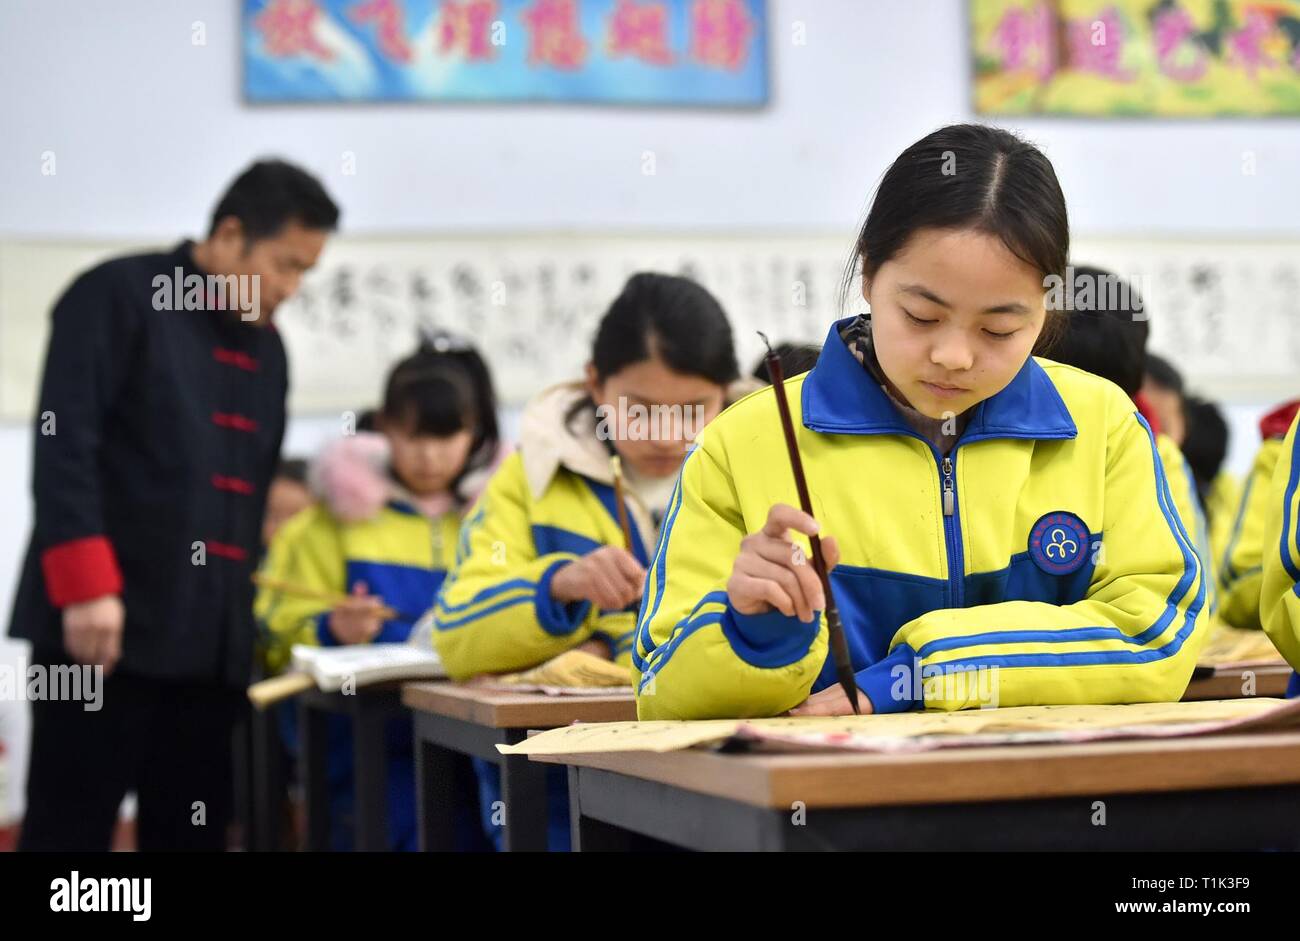 (190327) -- BEIJING, March 27, 2019 (Xinhua) -- Students practice writing calligraphy at Hanjiawa Middle School in Shijiazhuang, north China's Hebei Province, Feb. 28, 2019. China's efforts to promote the 'balanced development' of compulsory education, which usually means narrowing inter-regional, rural-urban or inter-school gaps in terms of education conditions and quality, has borne fruit, the Ministry of Education said Tuesday. According to the ministry, the balanced development of compulsory education has been achieved in 2,717 counties, representing 92.7 percent of counties across the Stock Photo